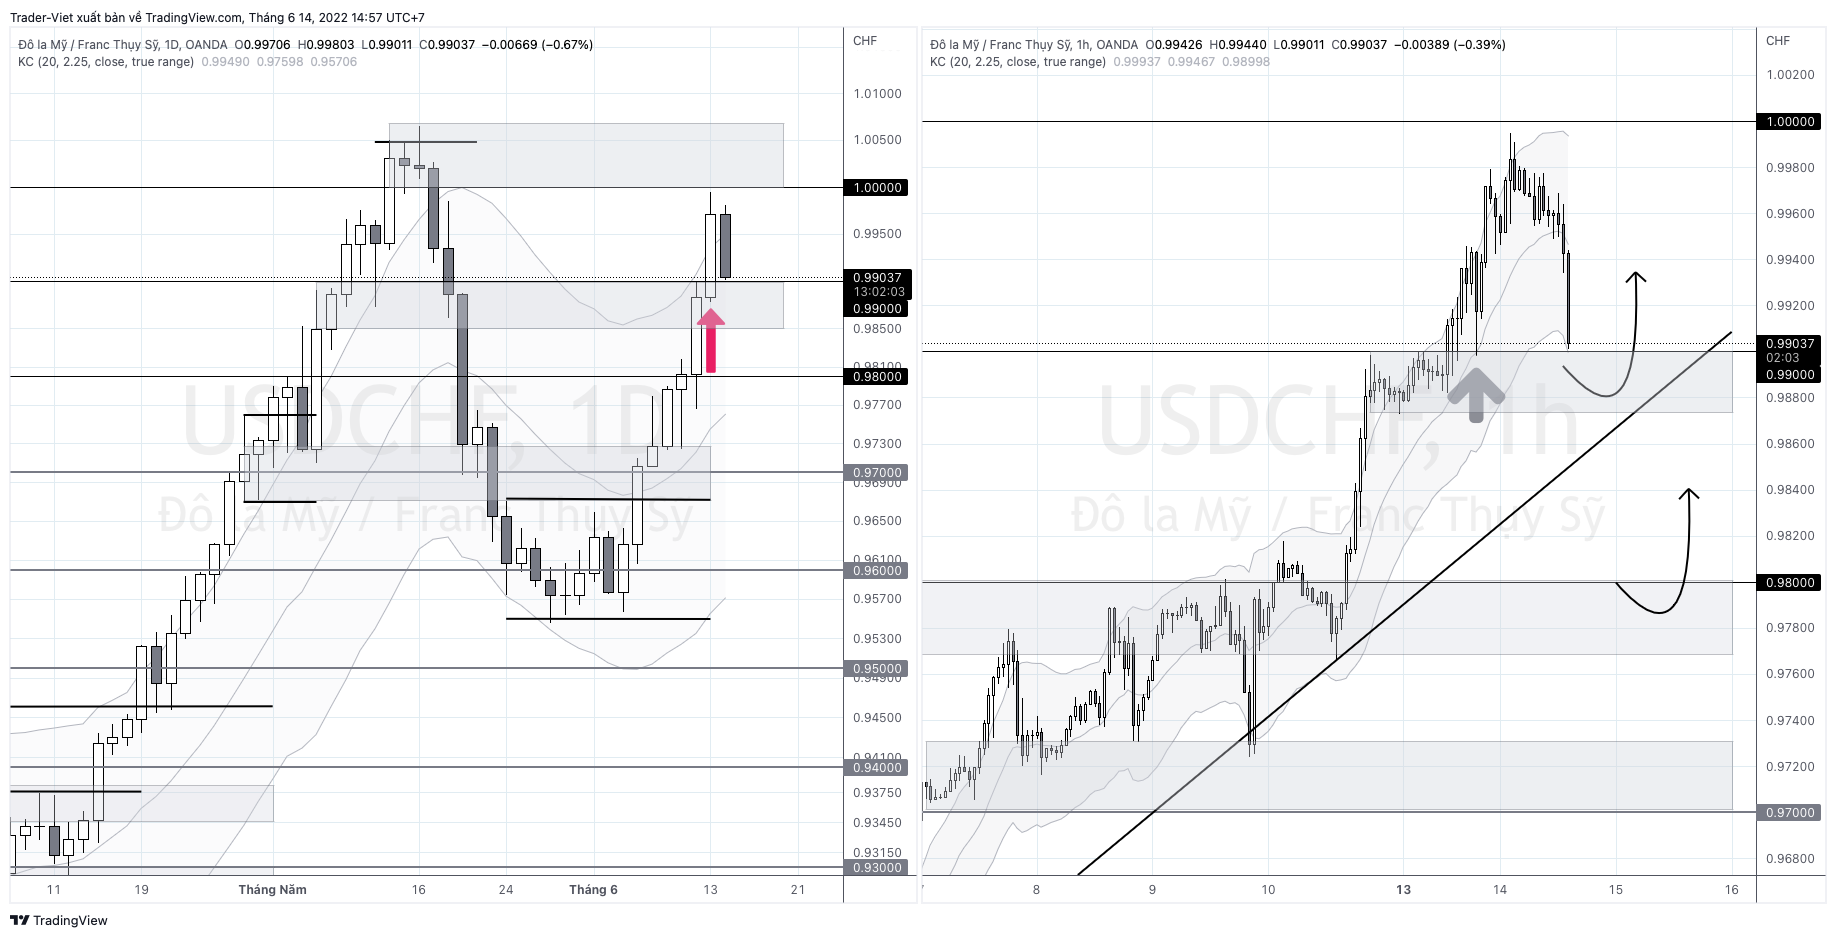 USDCHF_2022-06-14_14-57-58.png